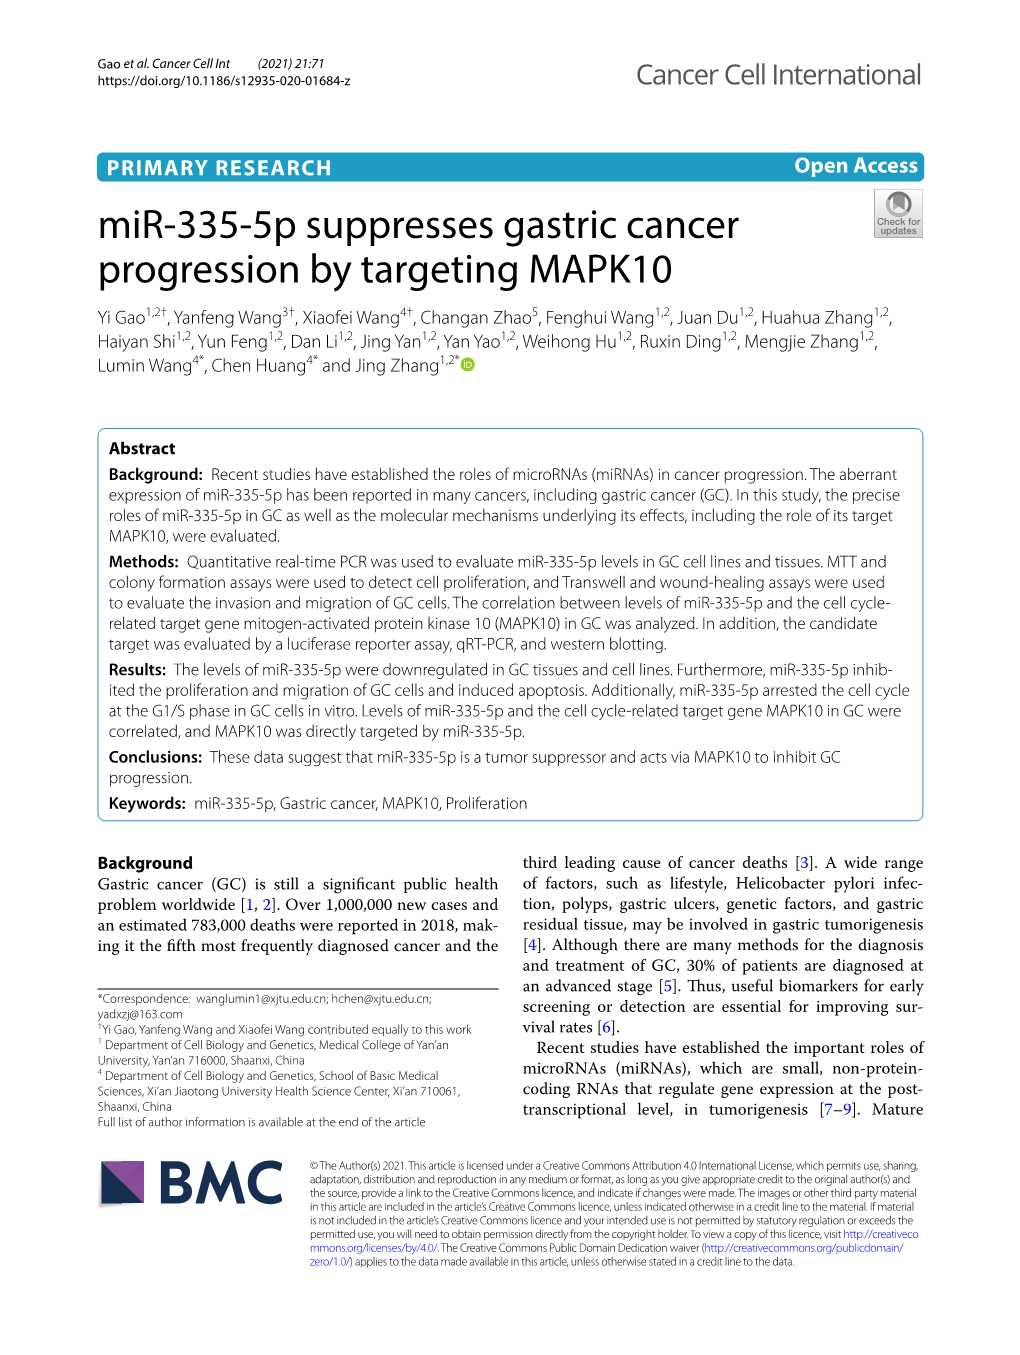 Mir-335-5P Suppresses Gastric Cancer Progression by Targeting